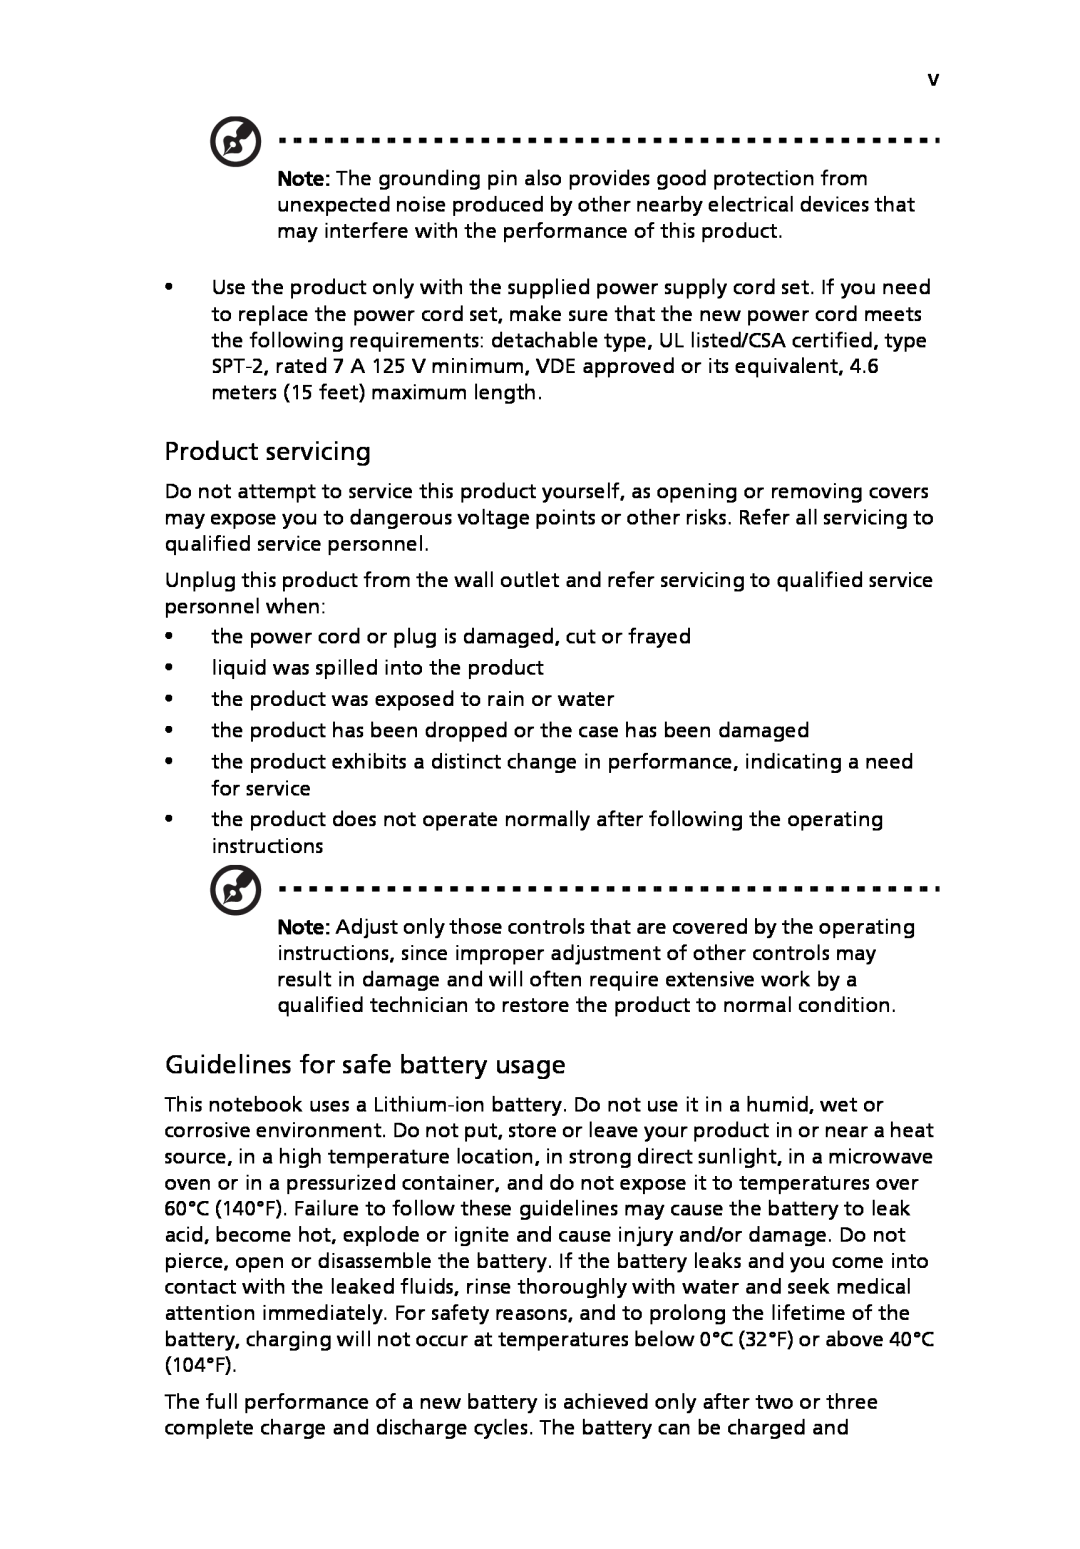 Acer LE1, 8920 Series manual Product servicing, Guidelines for safe battery usage 